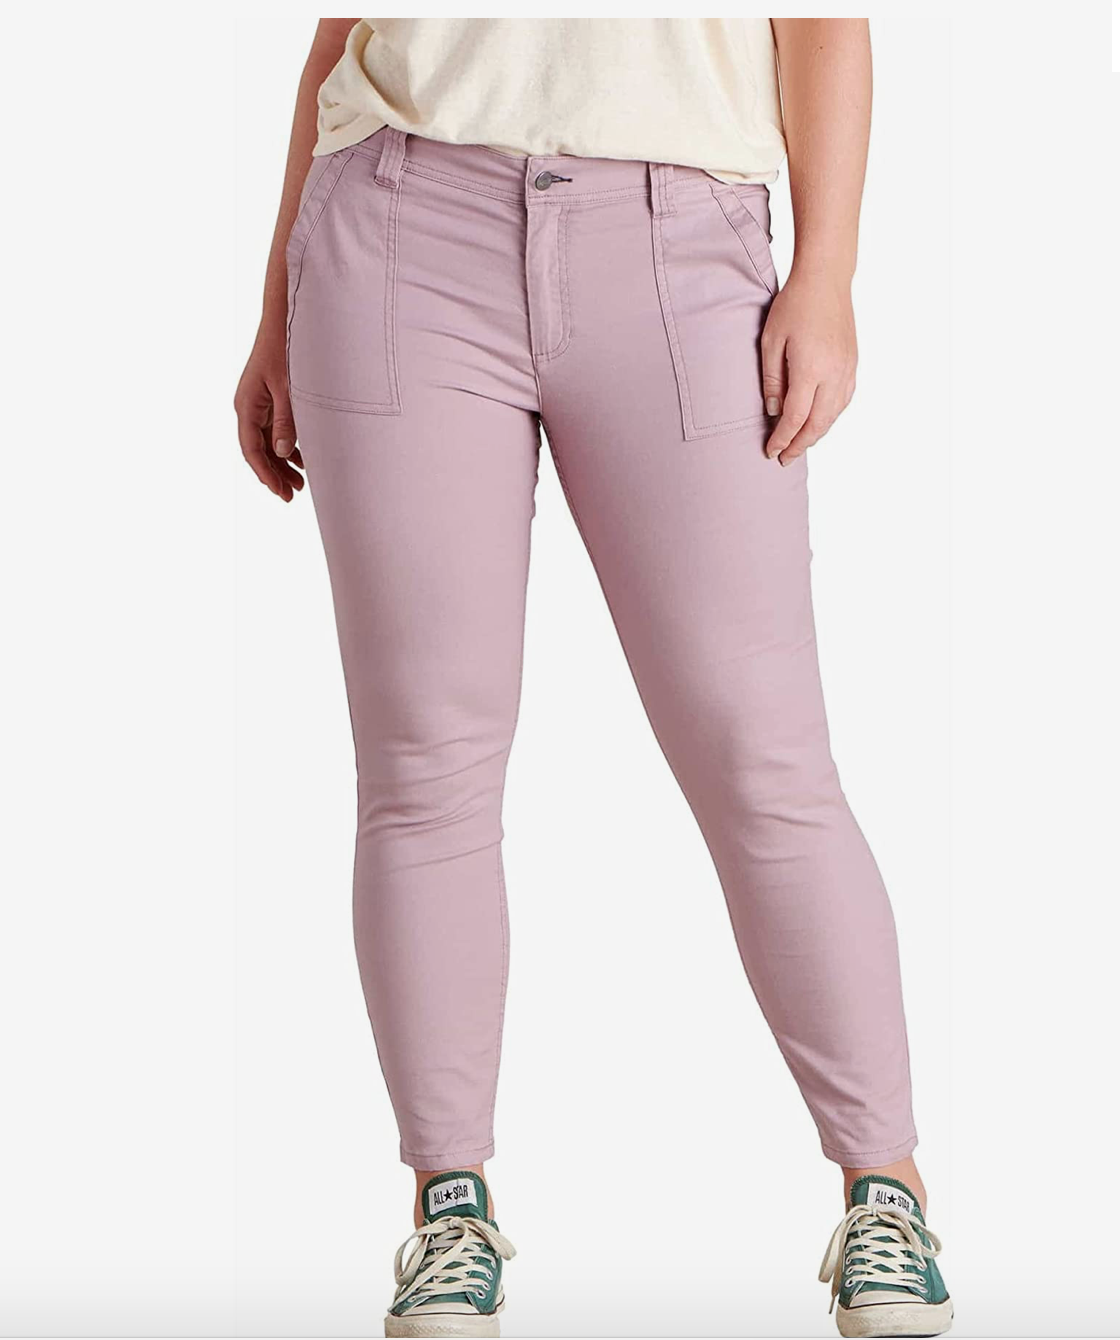 Earthworks Ankle Pant - Lilac - FINAL SALE